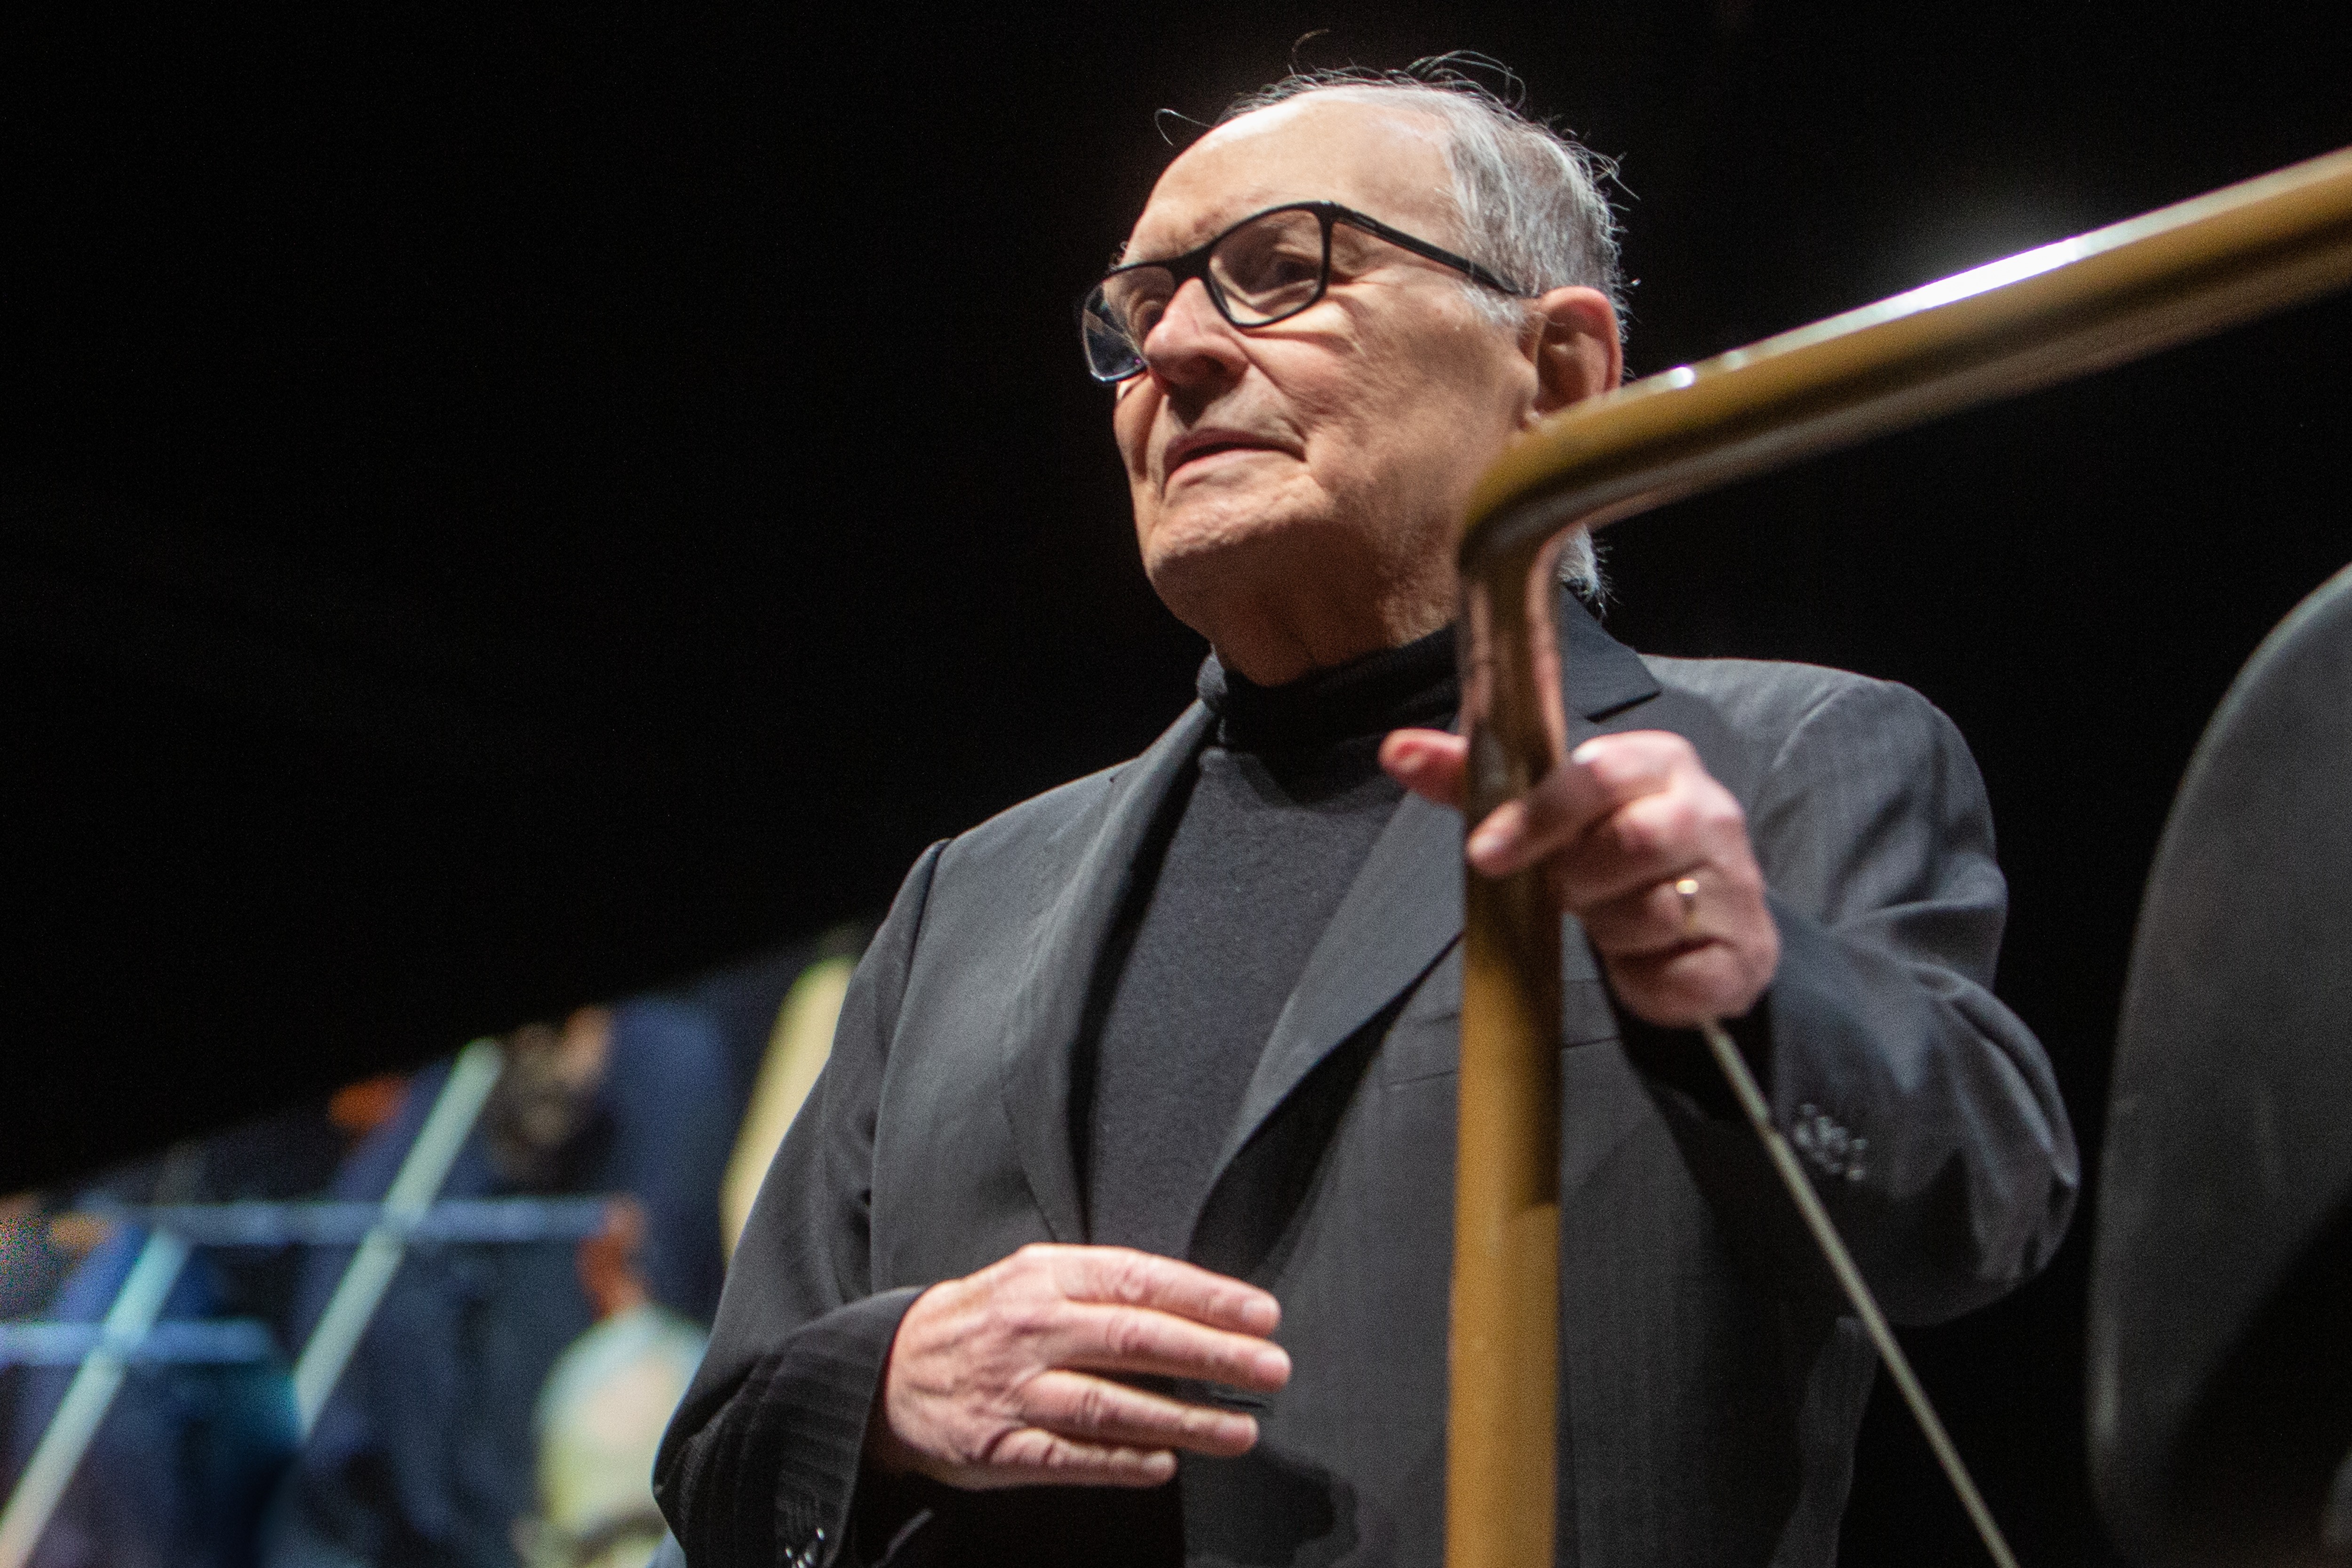 MADRID, SPAIN - MAY 07: (EDITORIAL USE ONLY) Ennio Morricone performs in concert at Wizink Center on May 07, 2019 in Madrid, Spain. (Photo by Ricardo Rubio/Europa Press via Getty Images) (Photo by Europa Press Entertainment/Europa Press via Getty Images) (Foto: Europa Press via Getty Images)